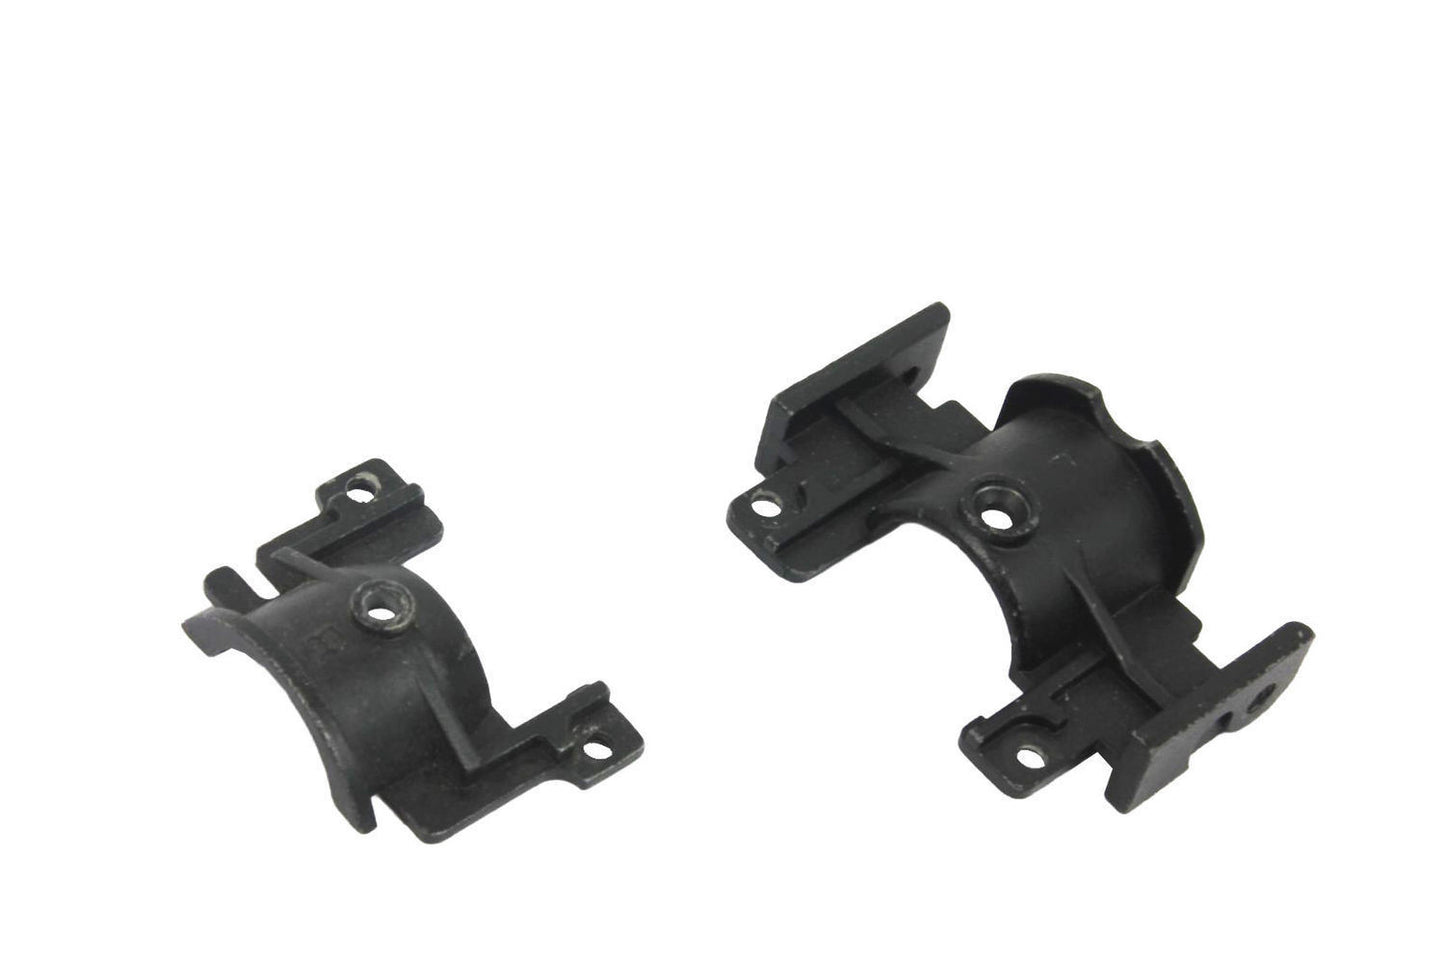 JG Compatible S System Hand Guard Wing Mounts